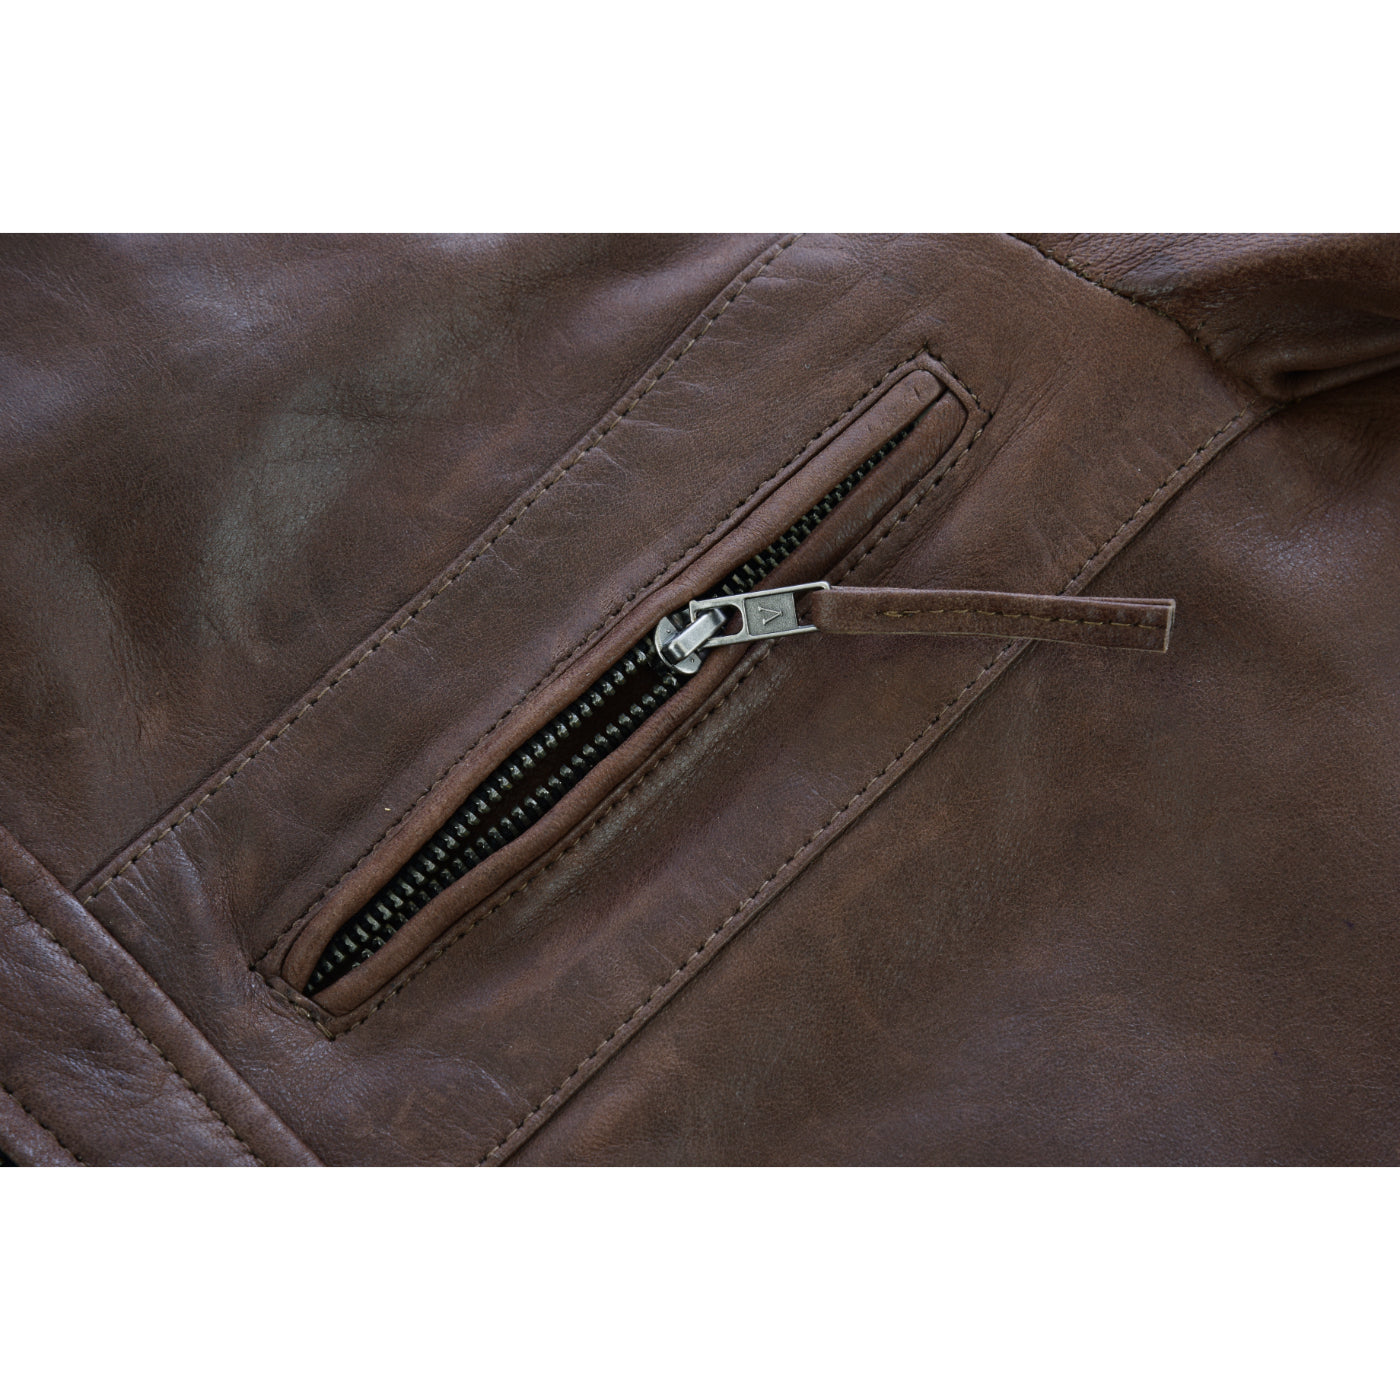 Men's Cafe Racer Waxed Lambskin Chocolate Brown Motorcycle Leather Jacket